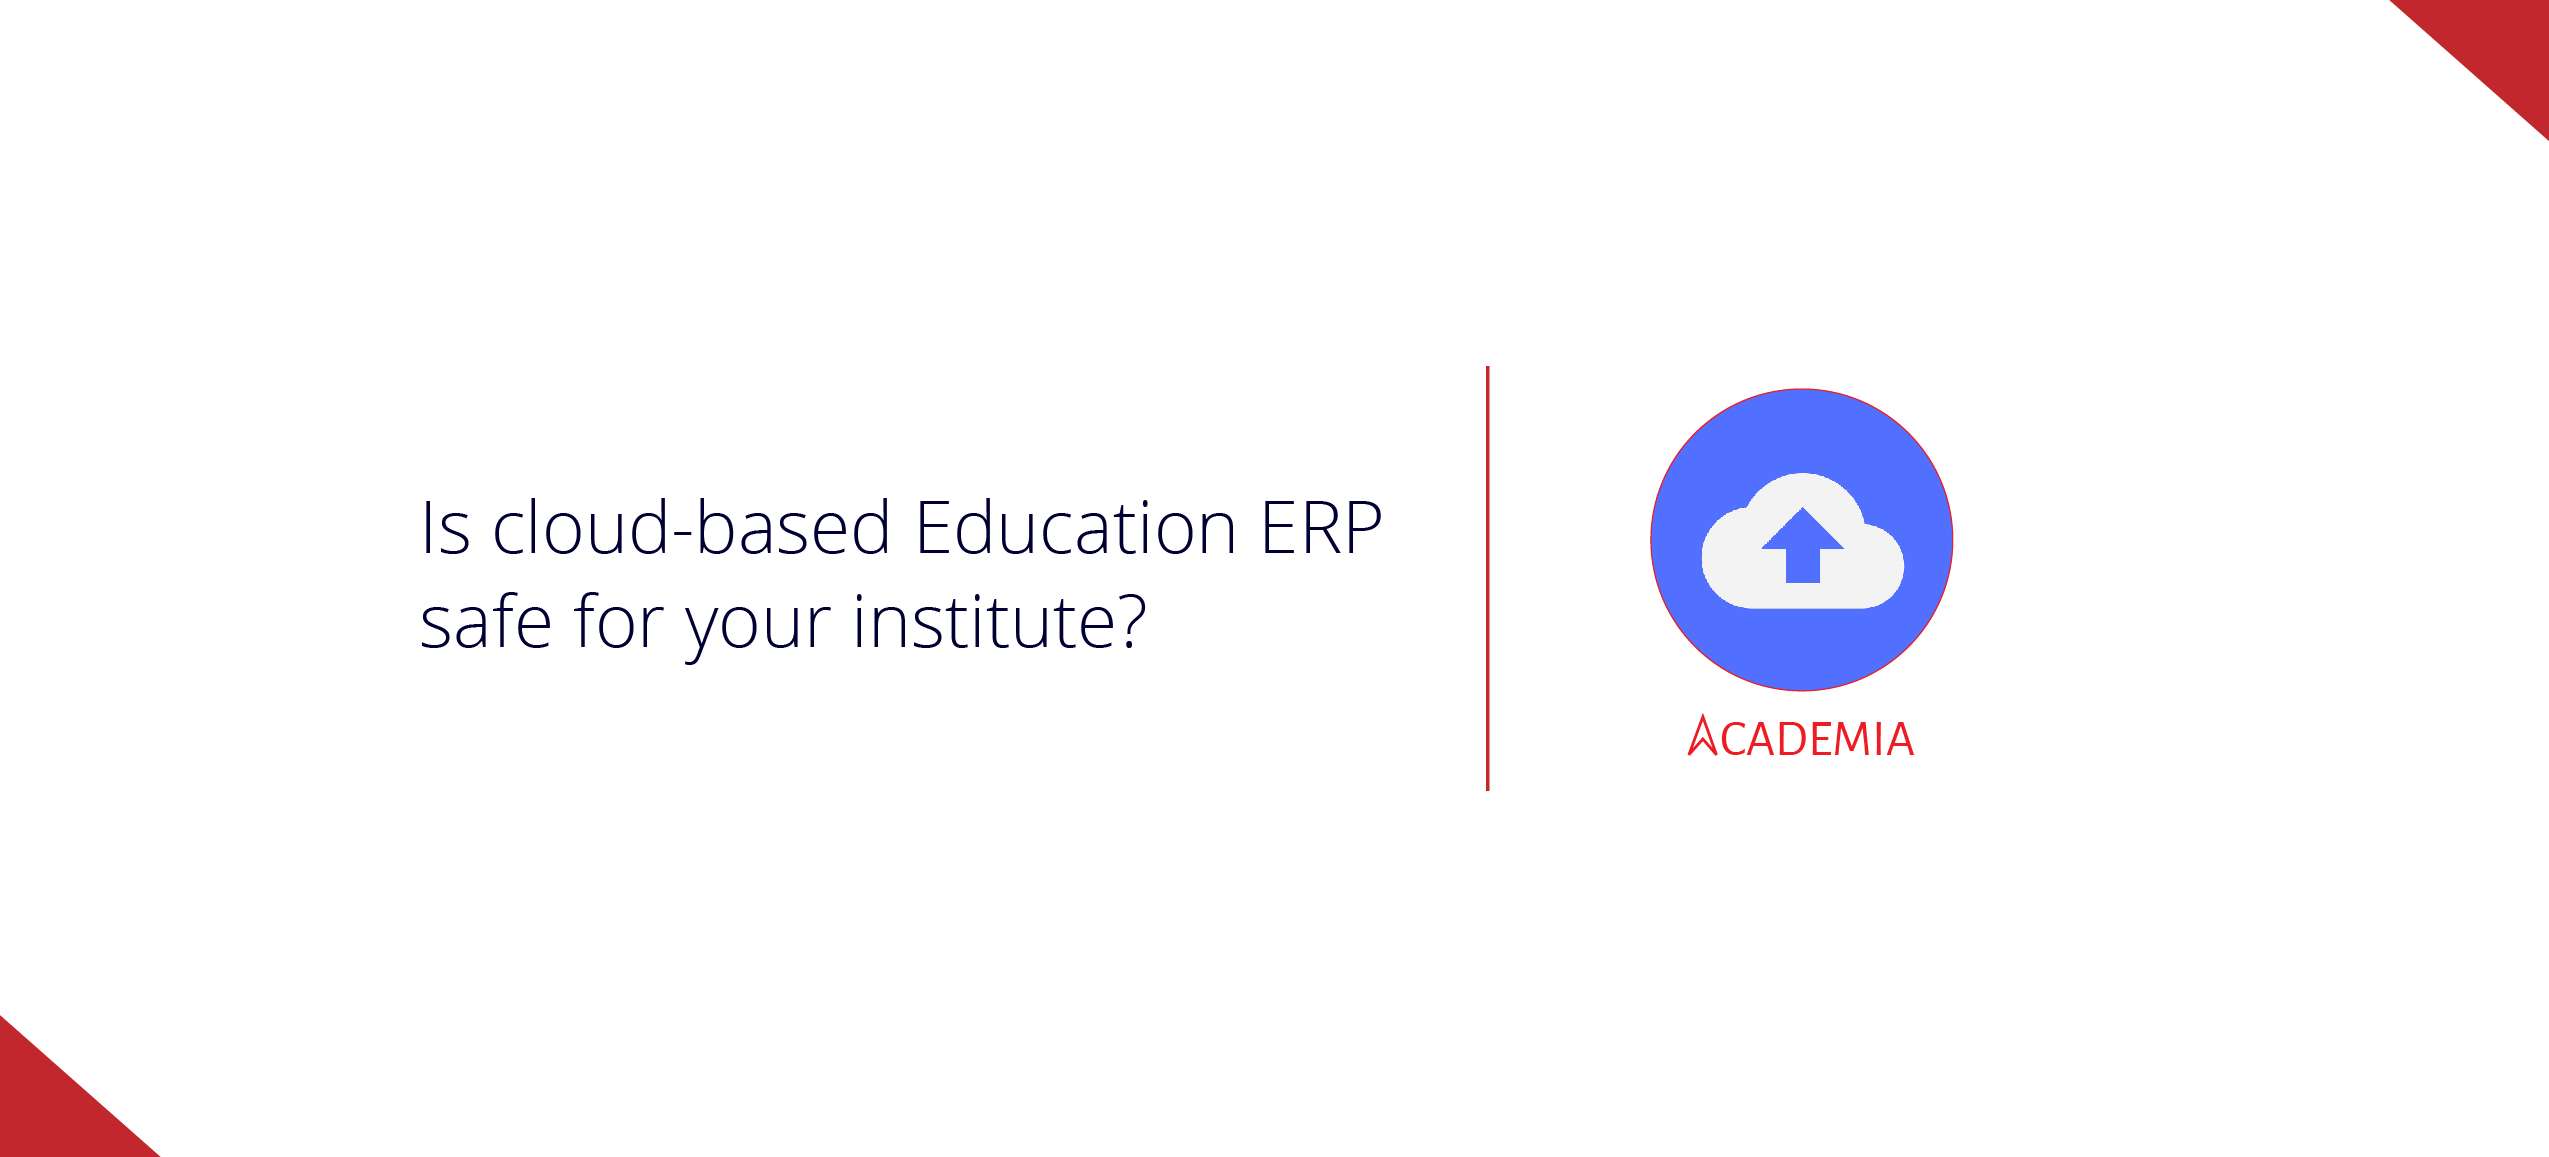 Is cloud-based Education ERP safe for your institute